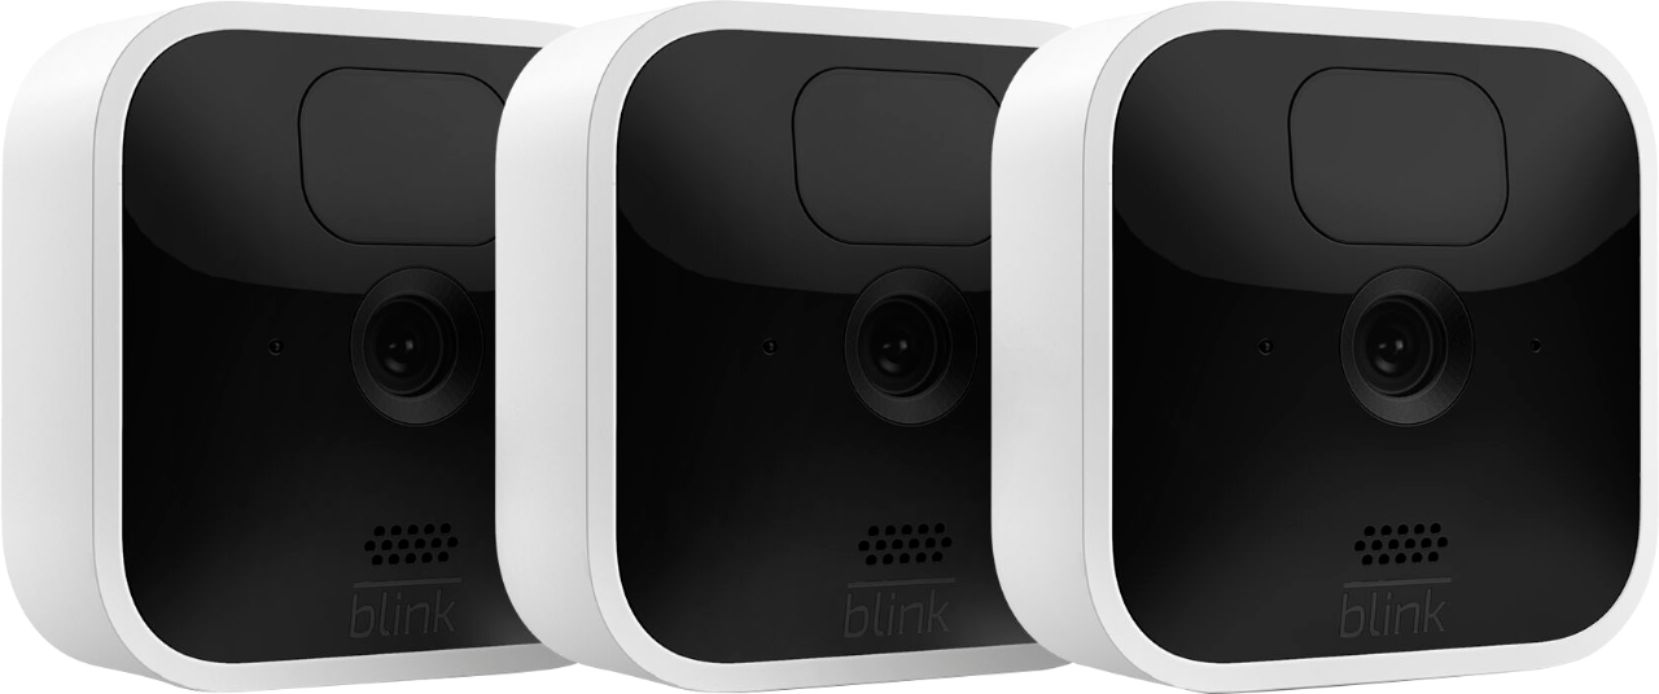 Blink XT Home Security Camera System, Motion Detection, HD Video, 2-Year  Battery, Free Cloud Storage Included 3 Camera Black B071YPNMN1 - Best Buy